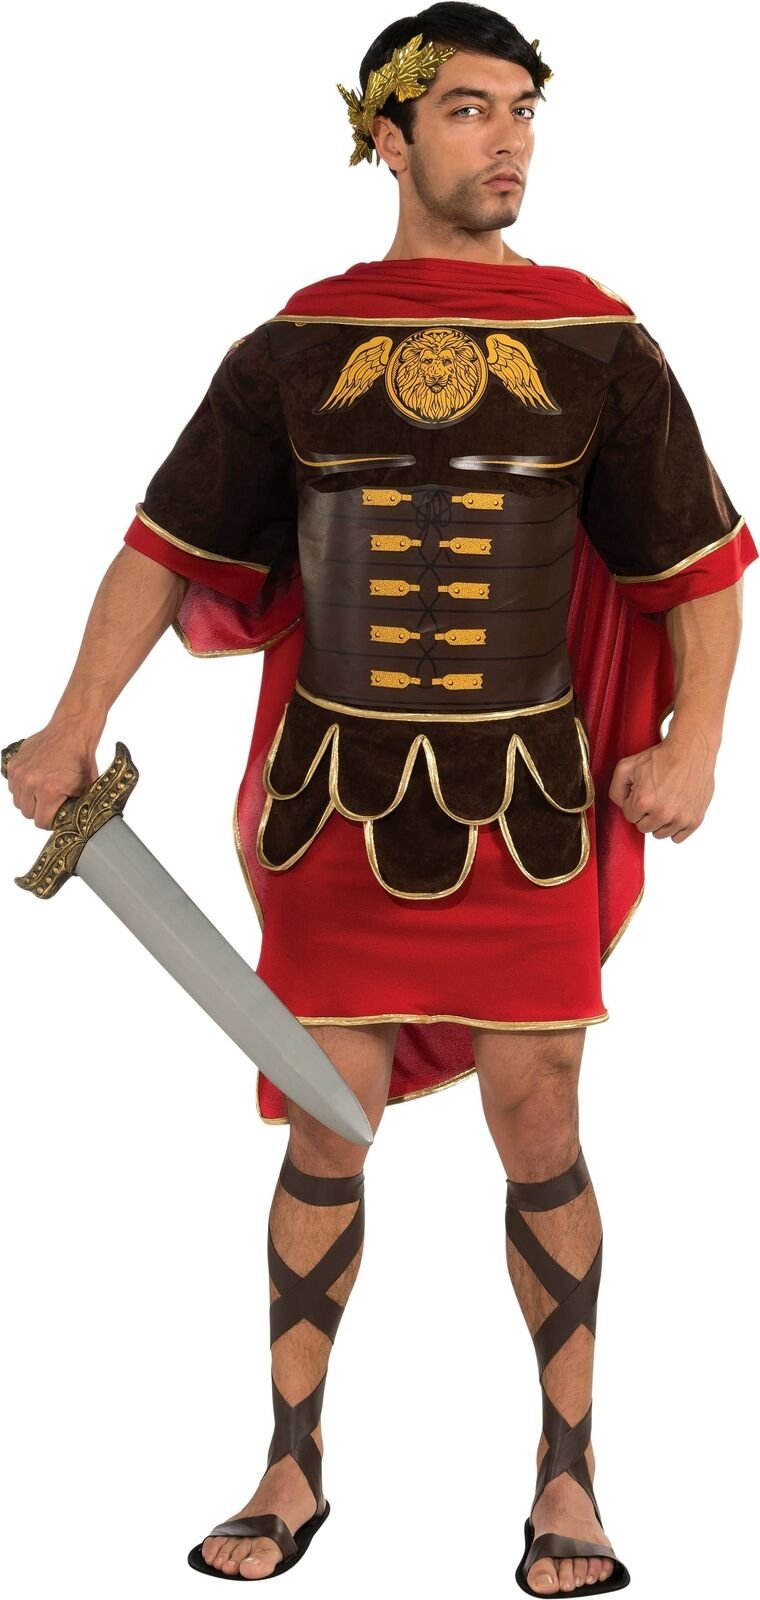 Image 2 of Rubie's Costume Heroes and Hombres Gladiator, Multicolor, STD, XL Costume